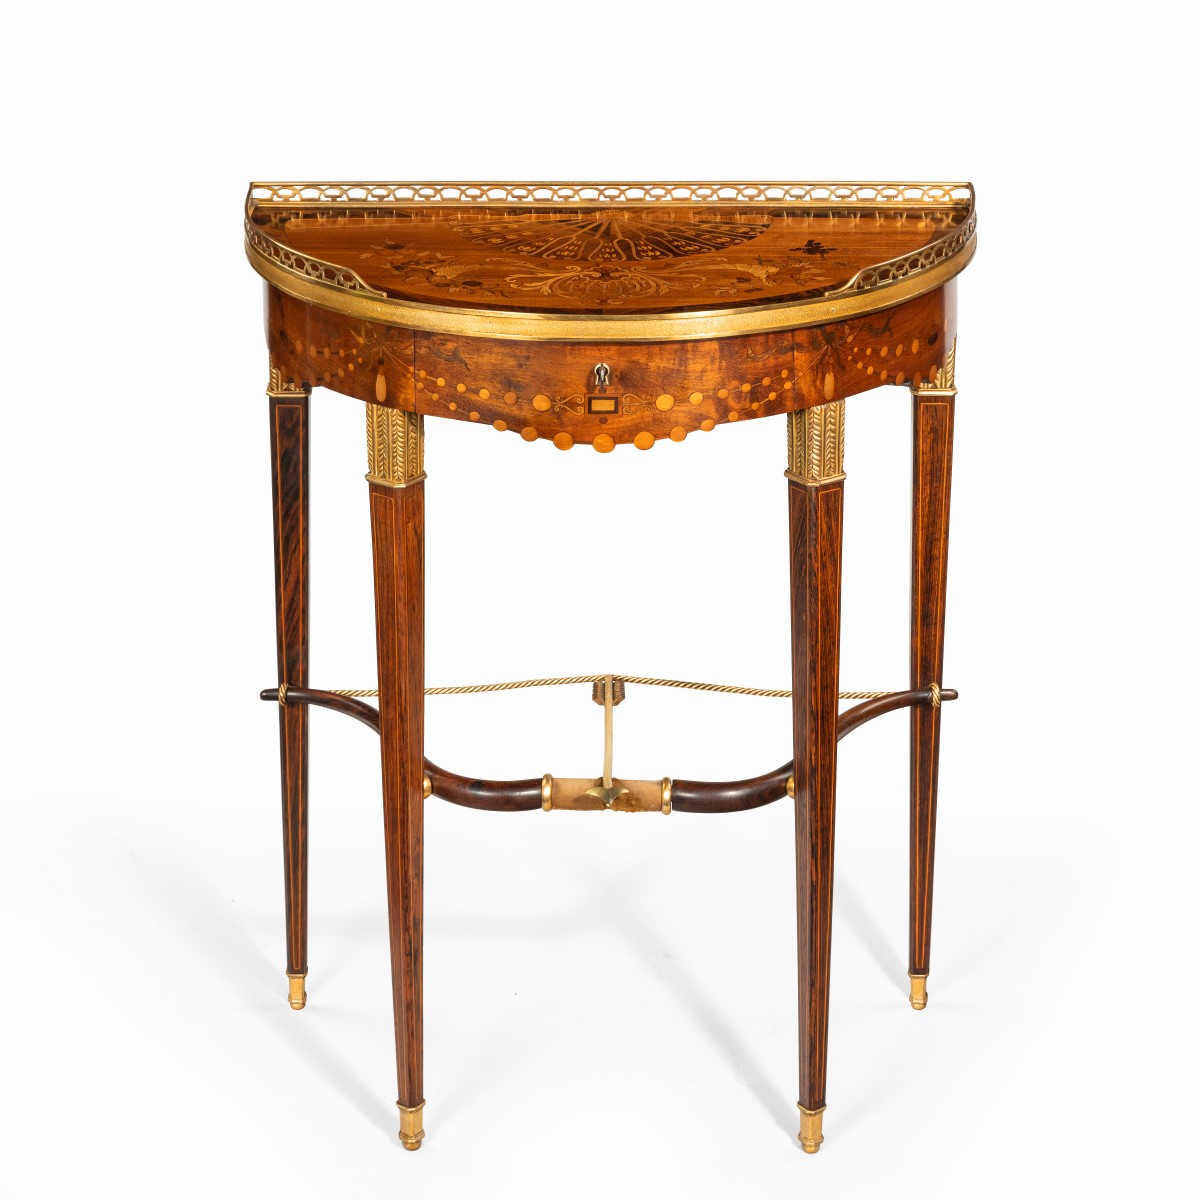 A French demi-lune rosewood bow and arrow table by Georges-François Alix